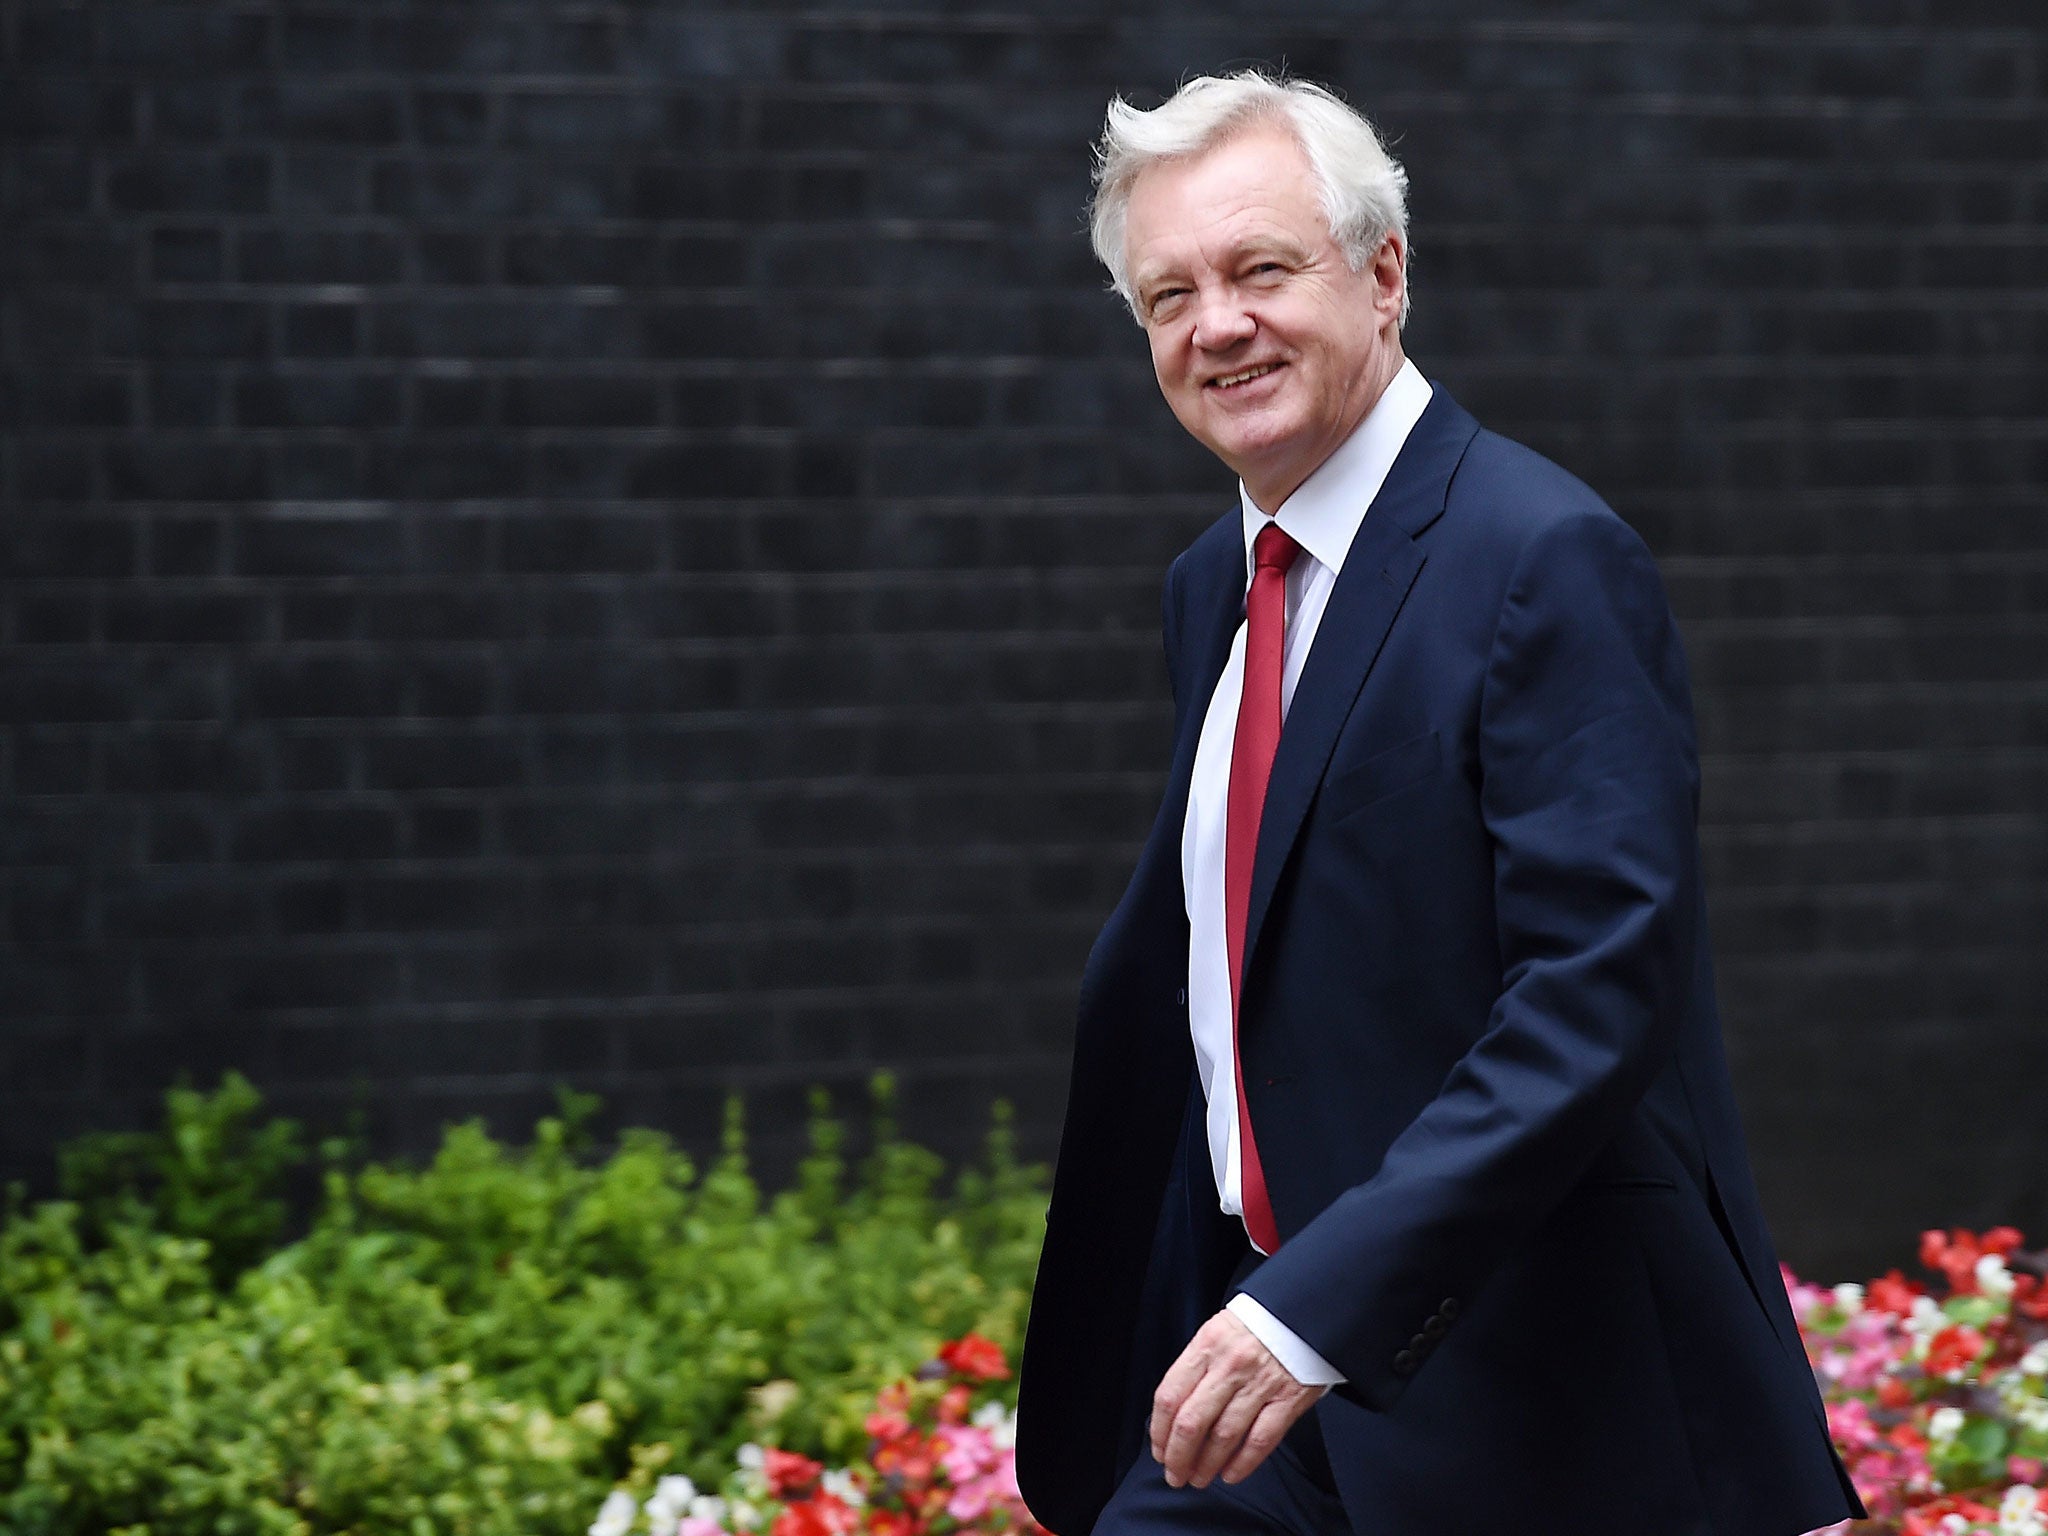 Brexit Secretary David Davis will tell the Tory Party faithful the change will mean ‘power and authority’ returned to the UK